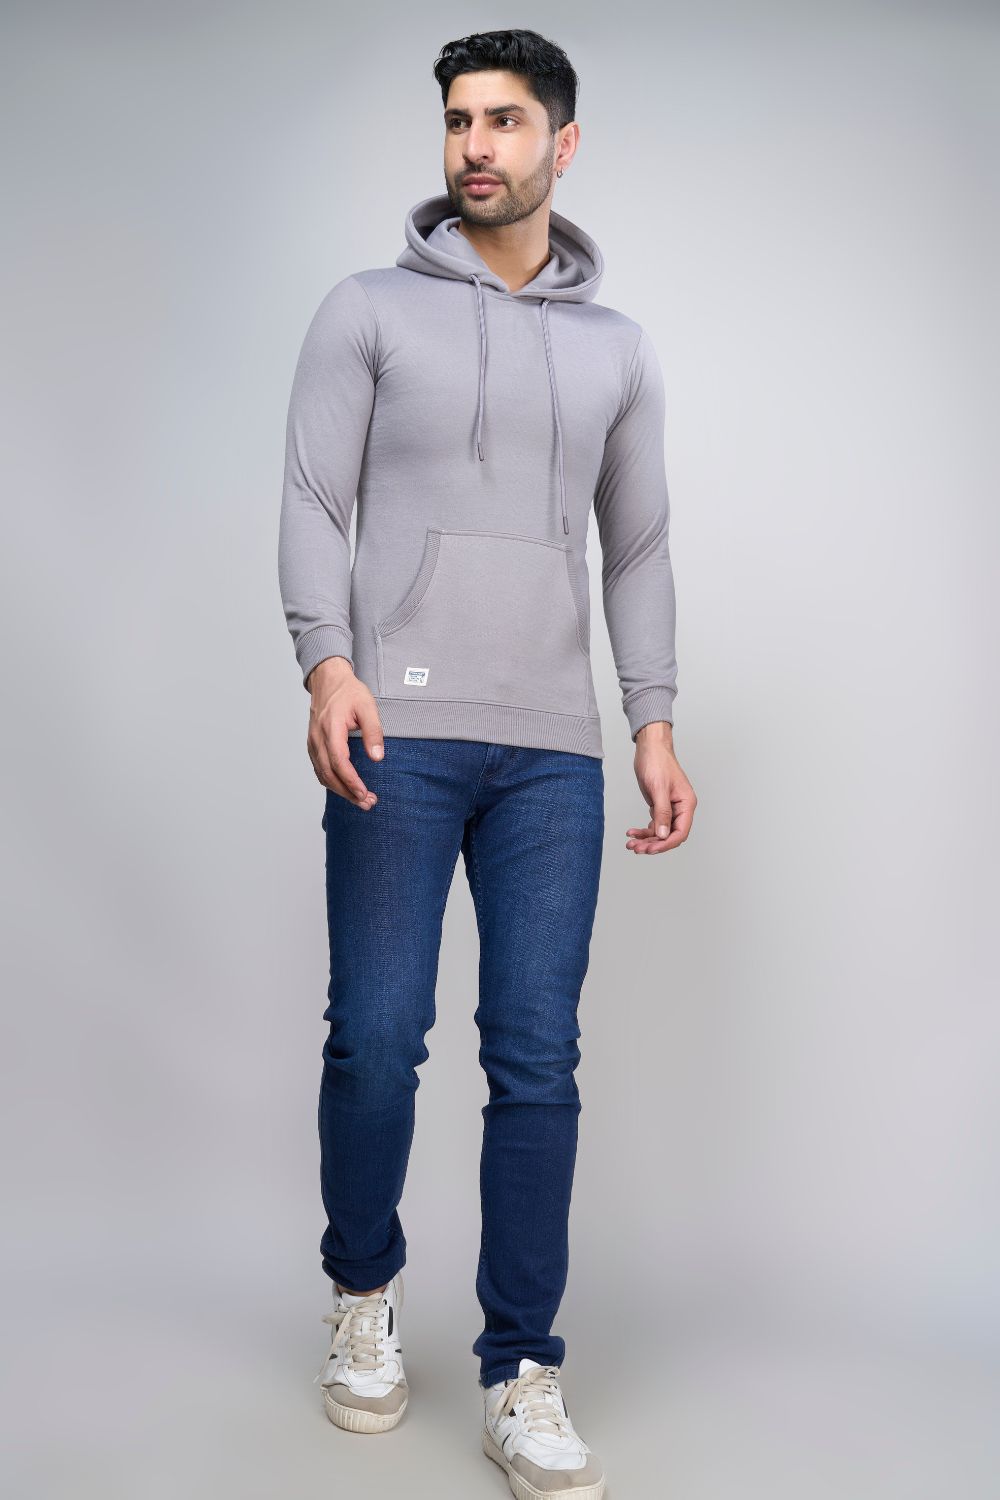 Grey Mist colored, hoodie for men with full sleeves and relaxed fit.